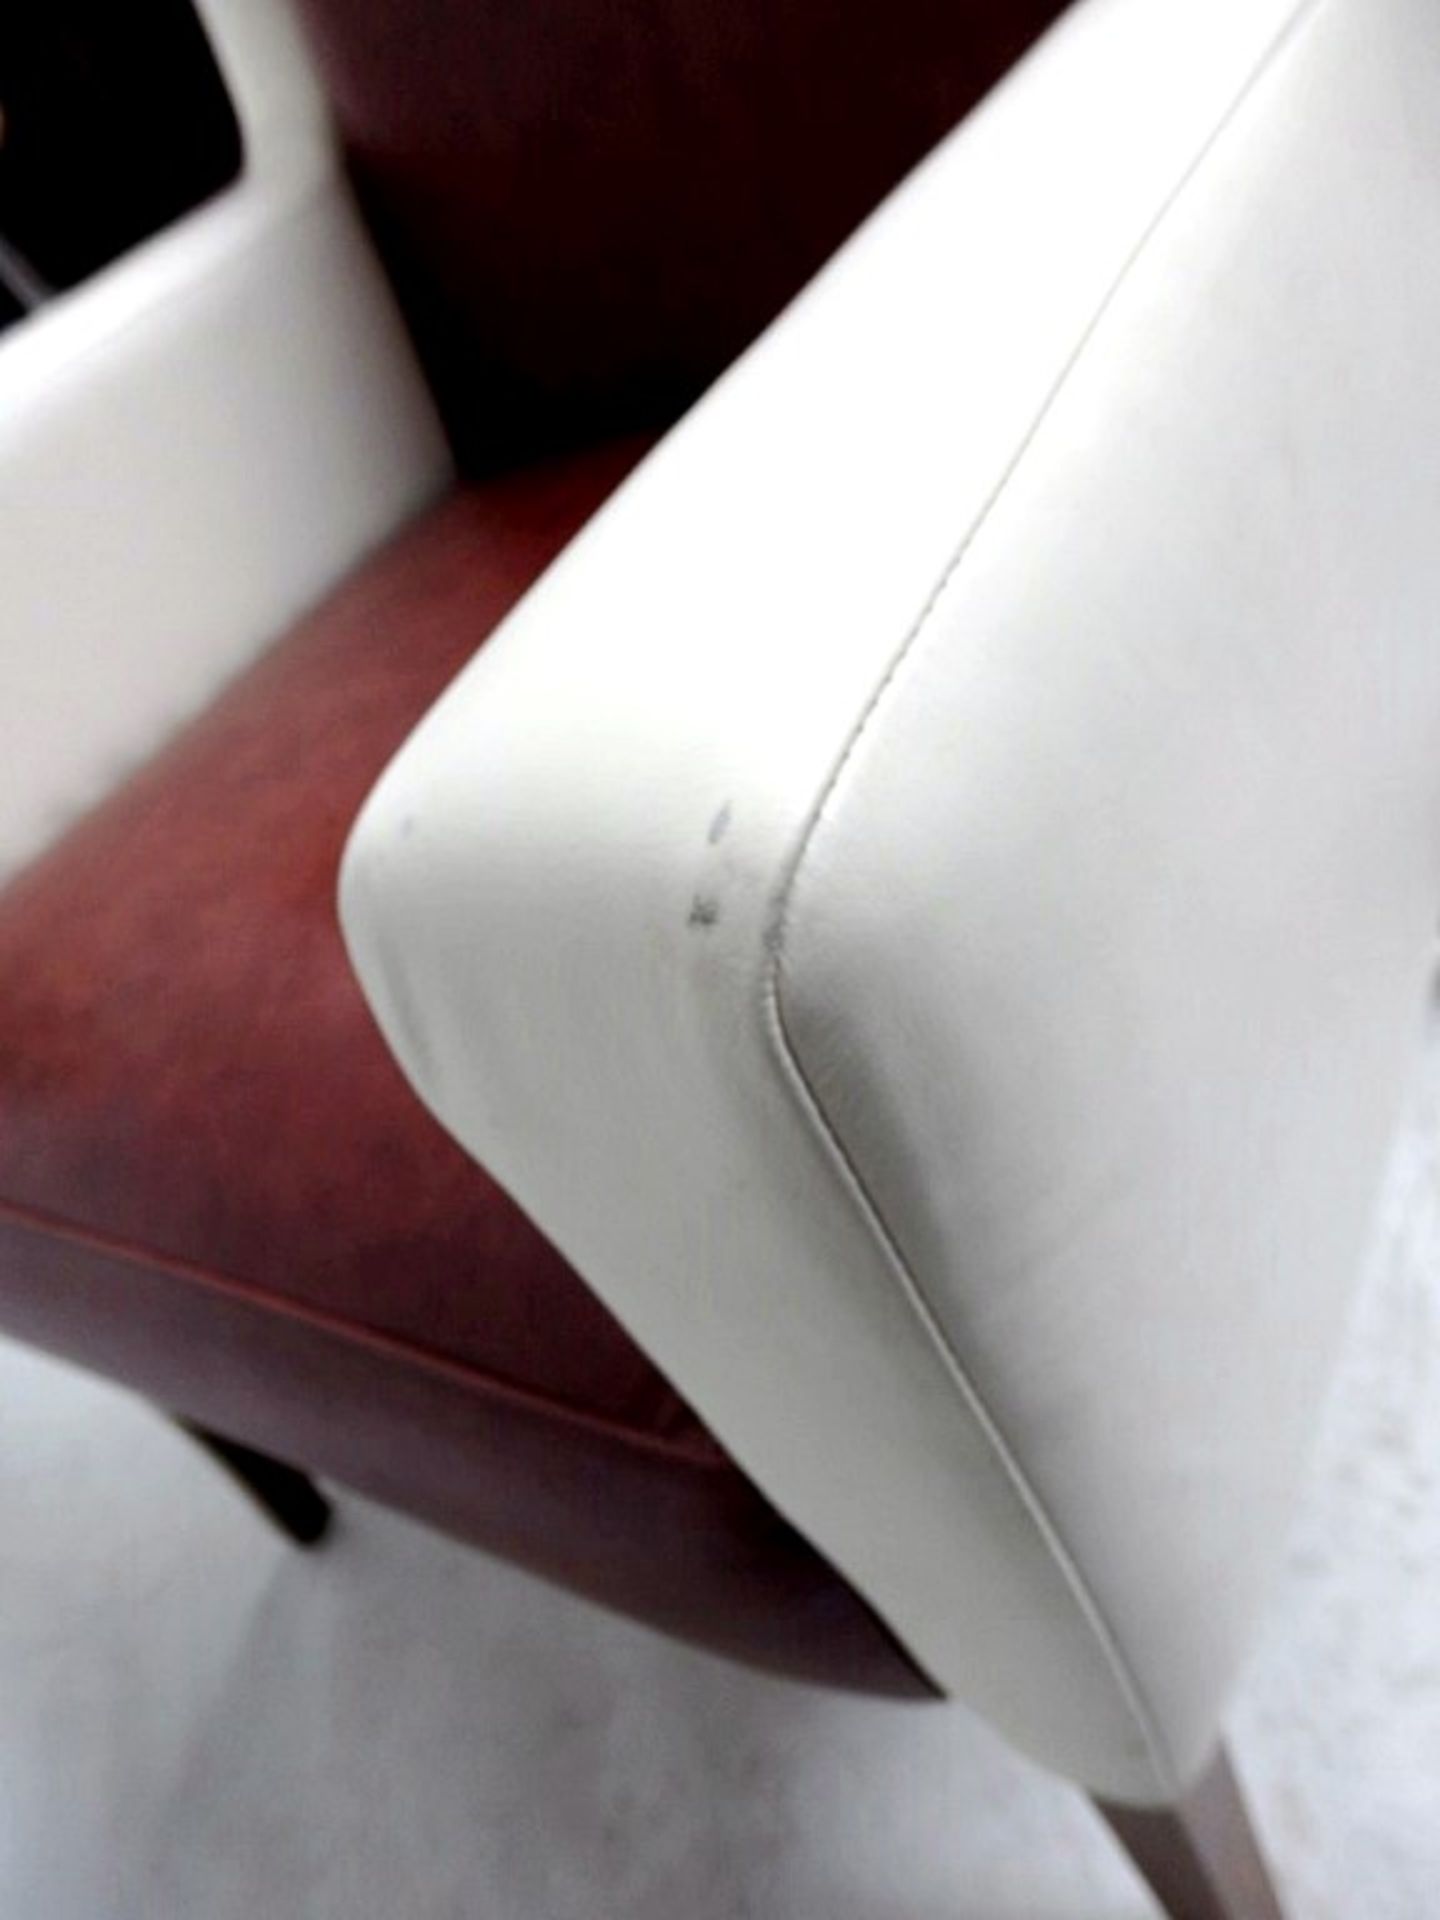 1 x Bespoke Armchair - Upholstered In Cream & Tan Leathers - Handcrafted & Upholstered By British - Image 3 of 8